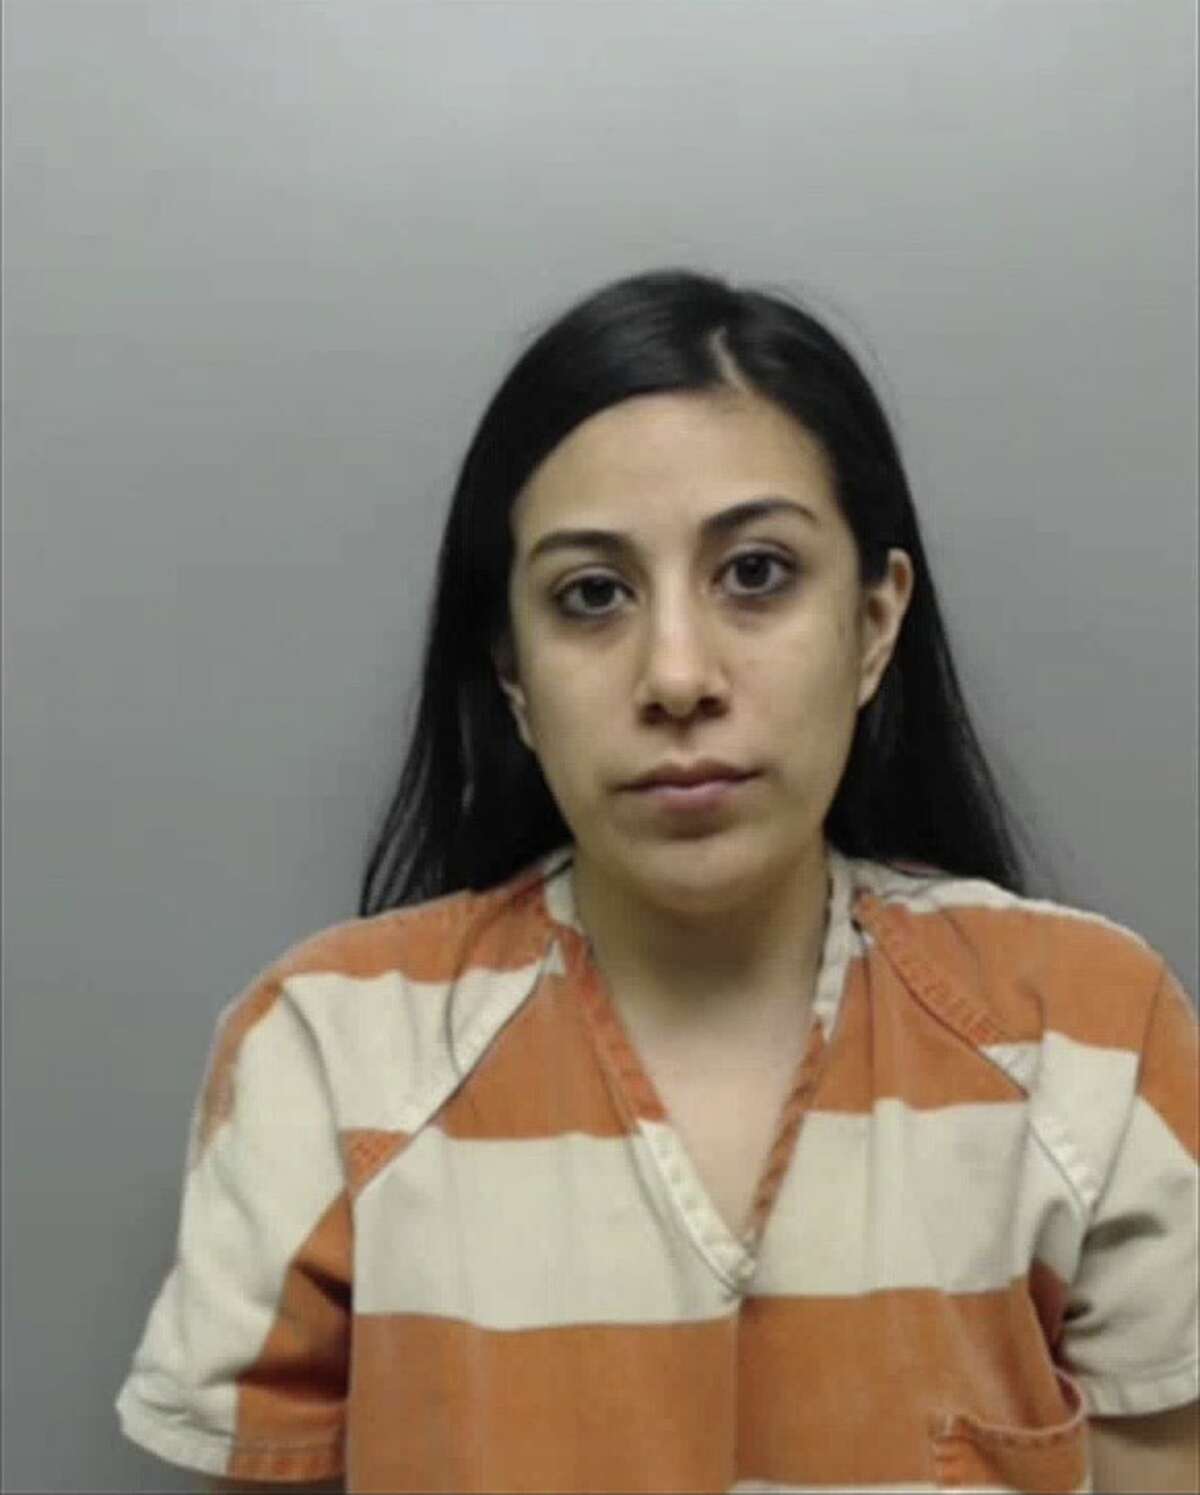 Priscilla Marisol Flores, 34, was charged with two counts of child abandonment with intent to return.